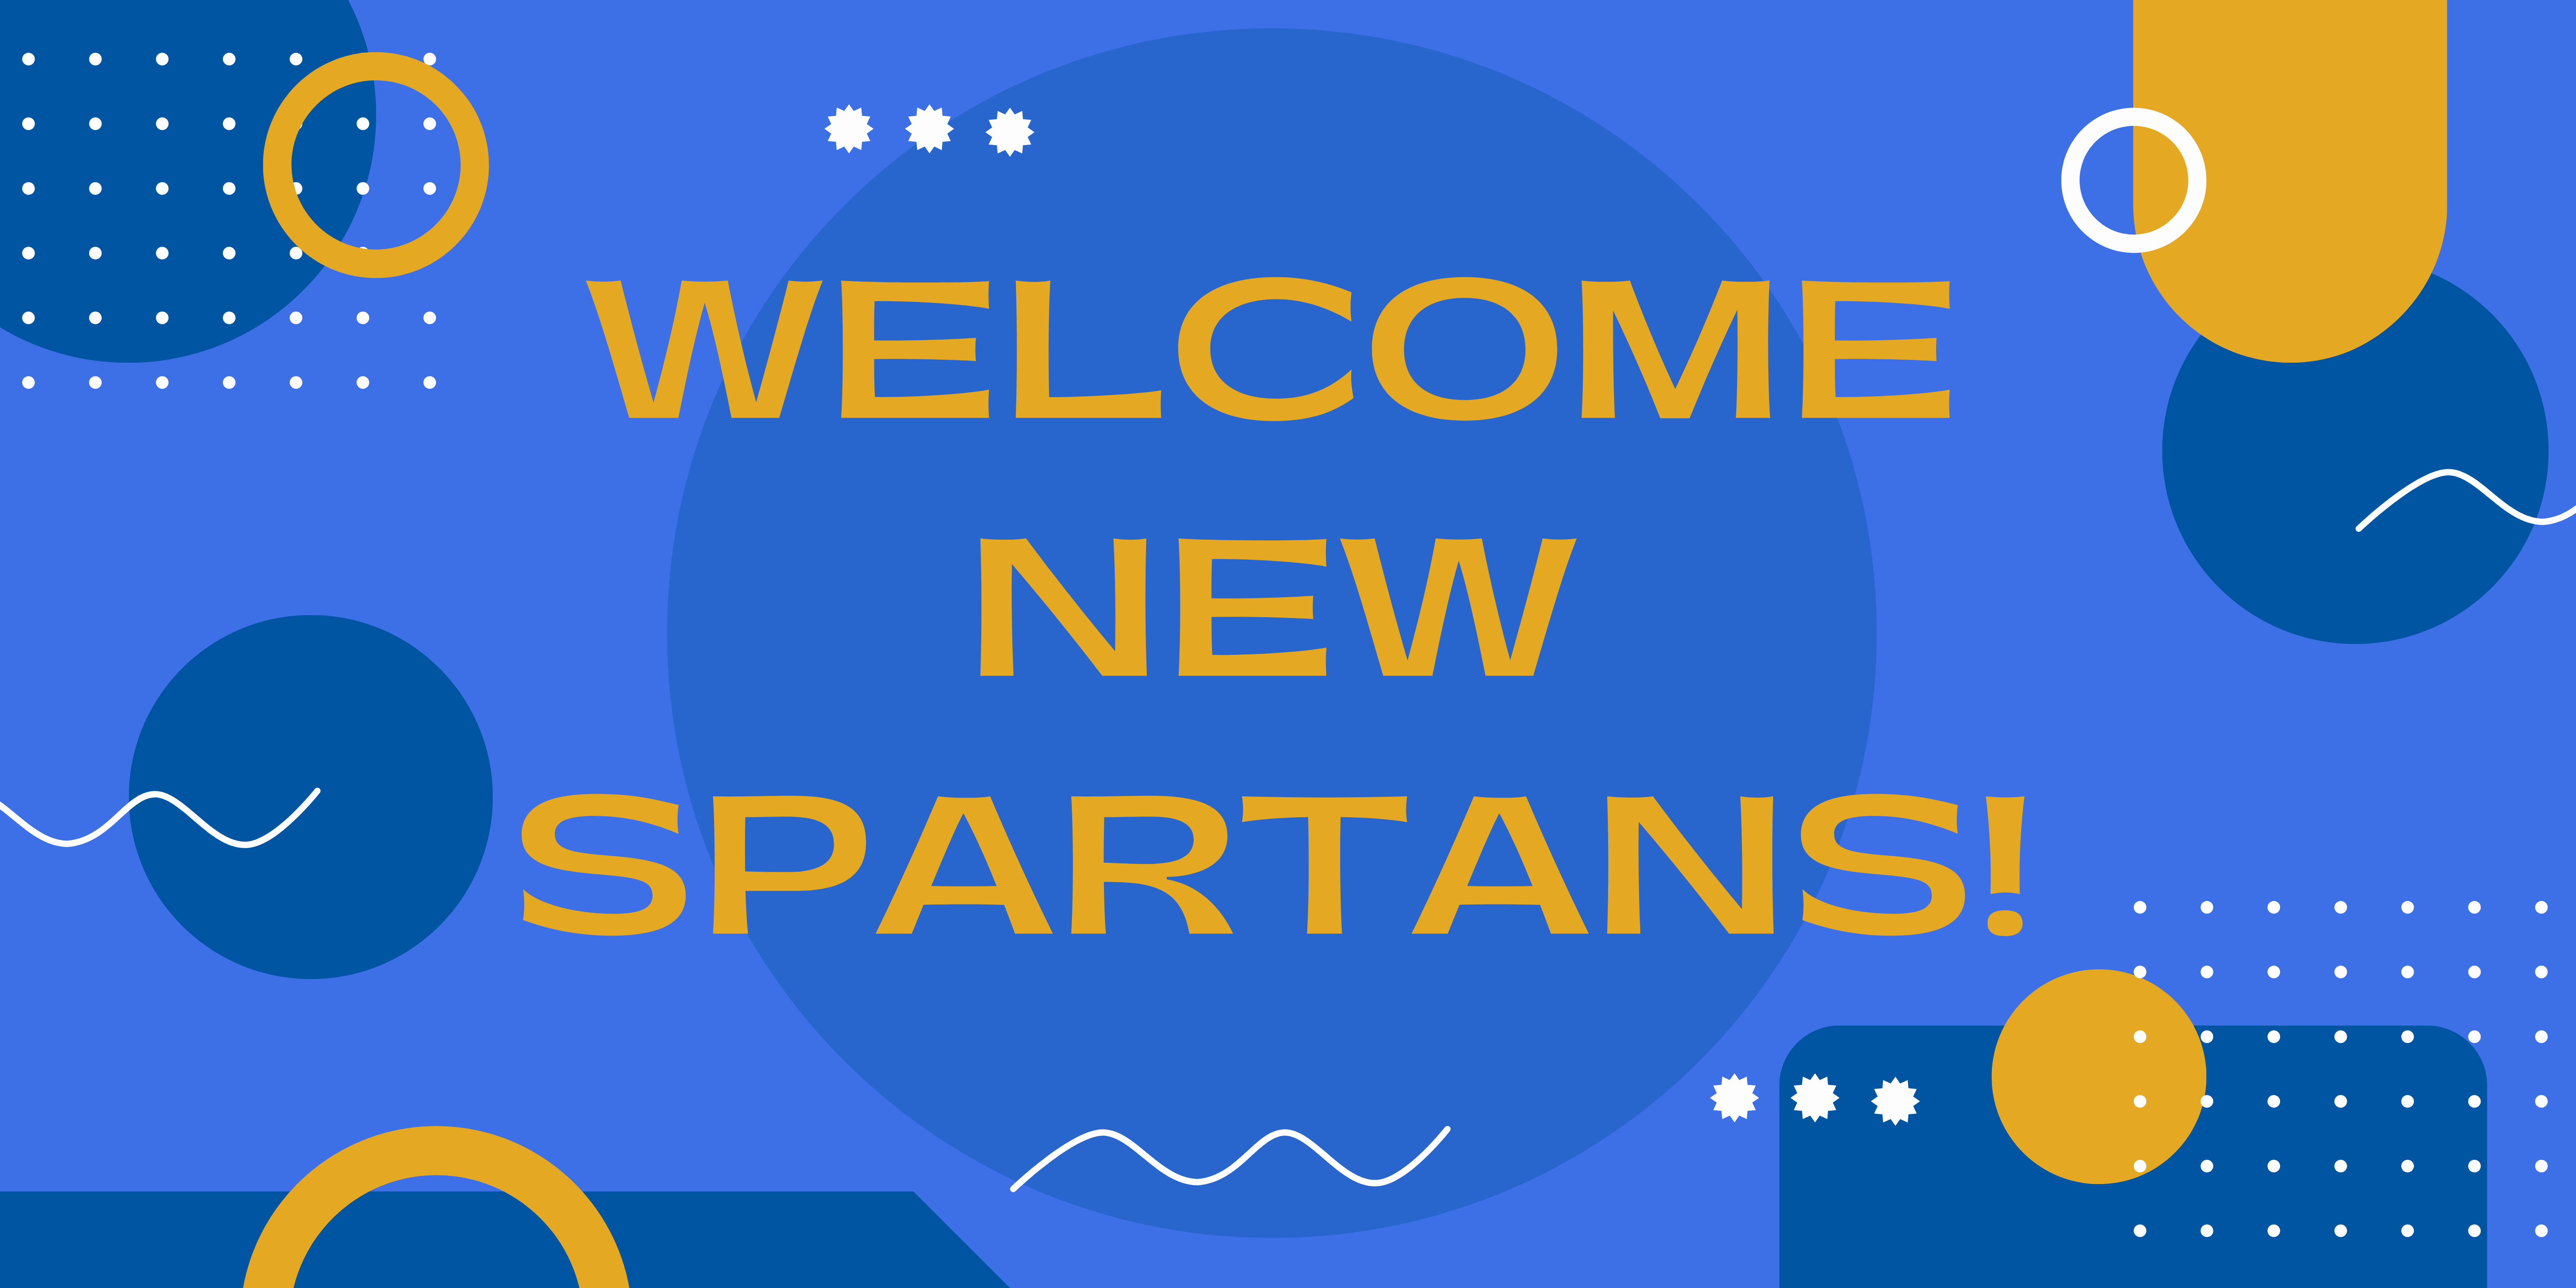 image of blue and gold geometric shapes with the words welcome new spartans in gold text 